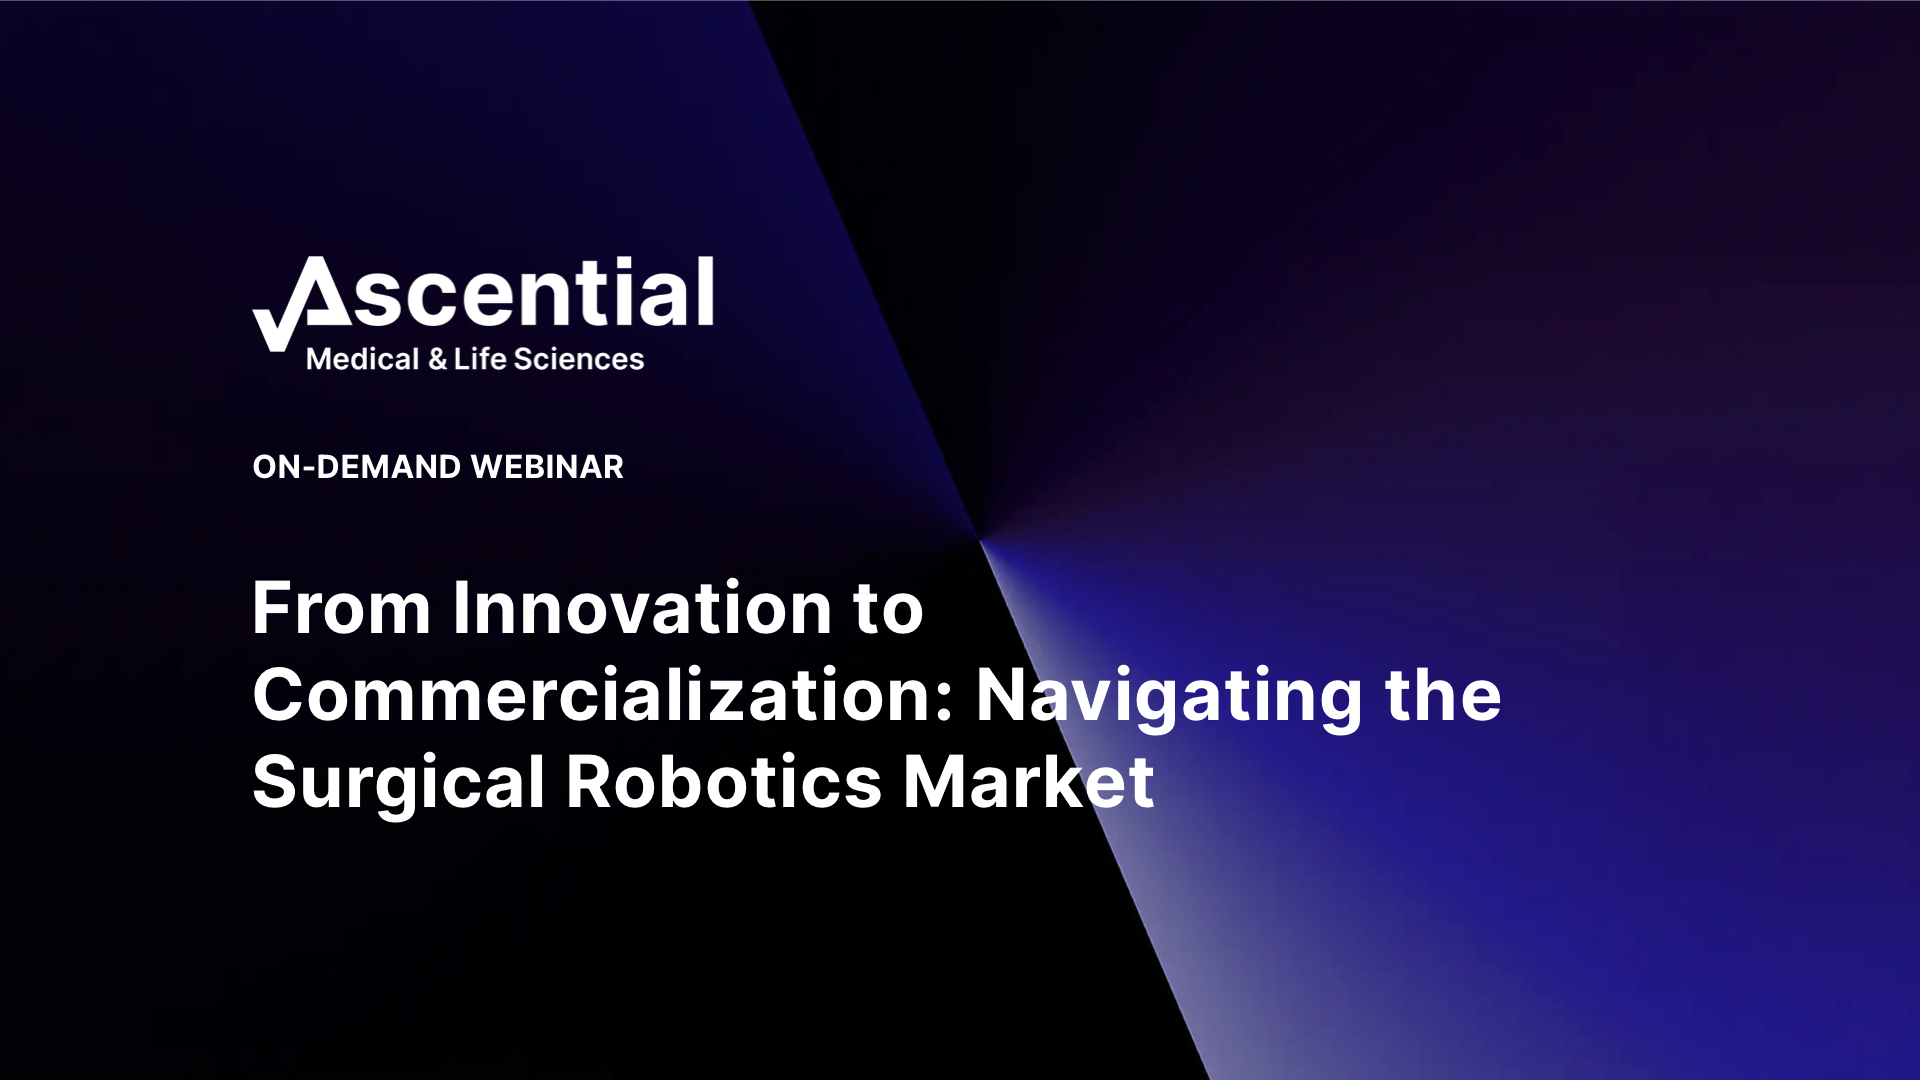 From Innovation to Commercialization: Navigating the Surgical Robotics Market